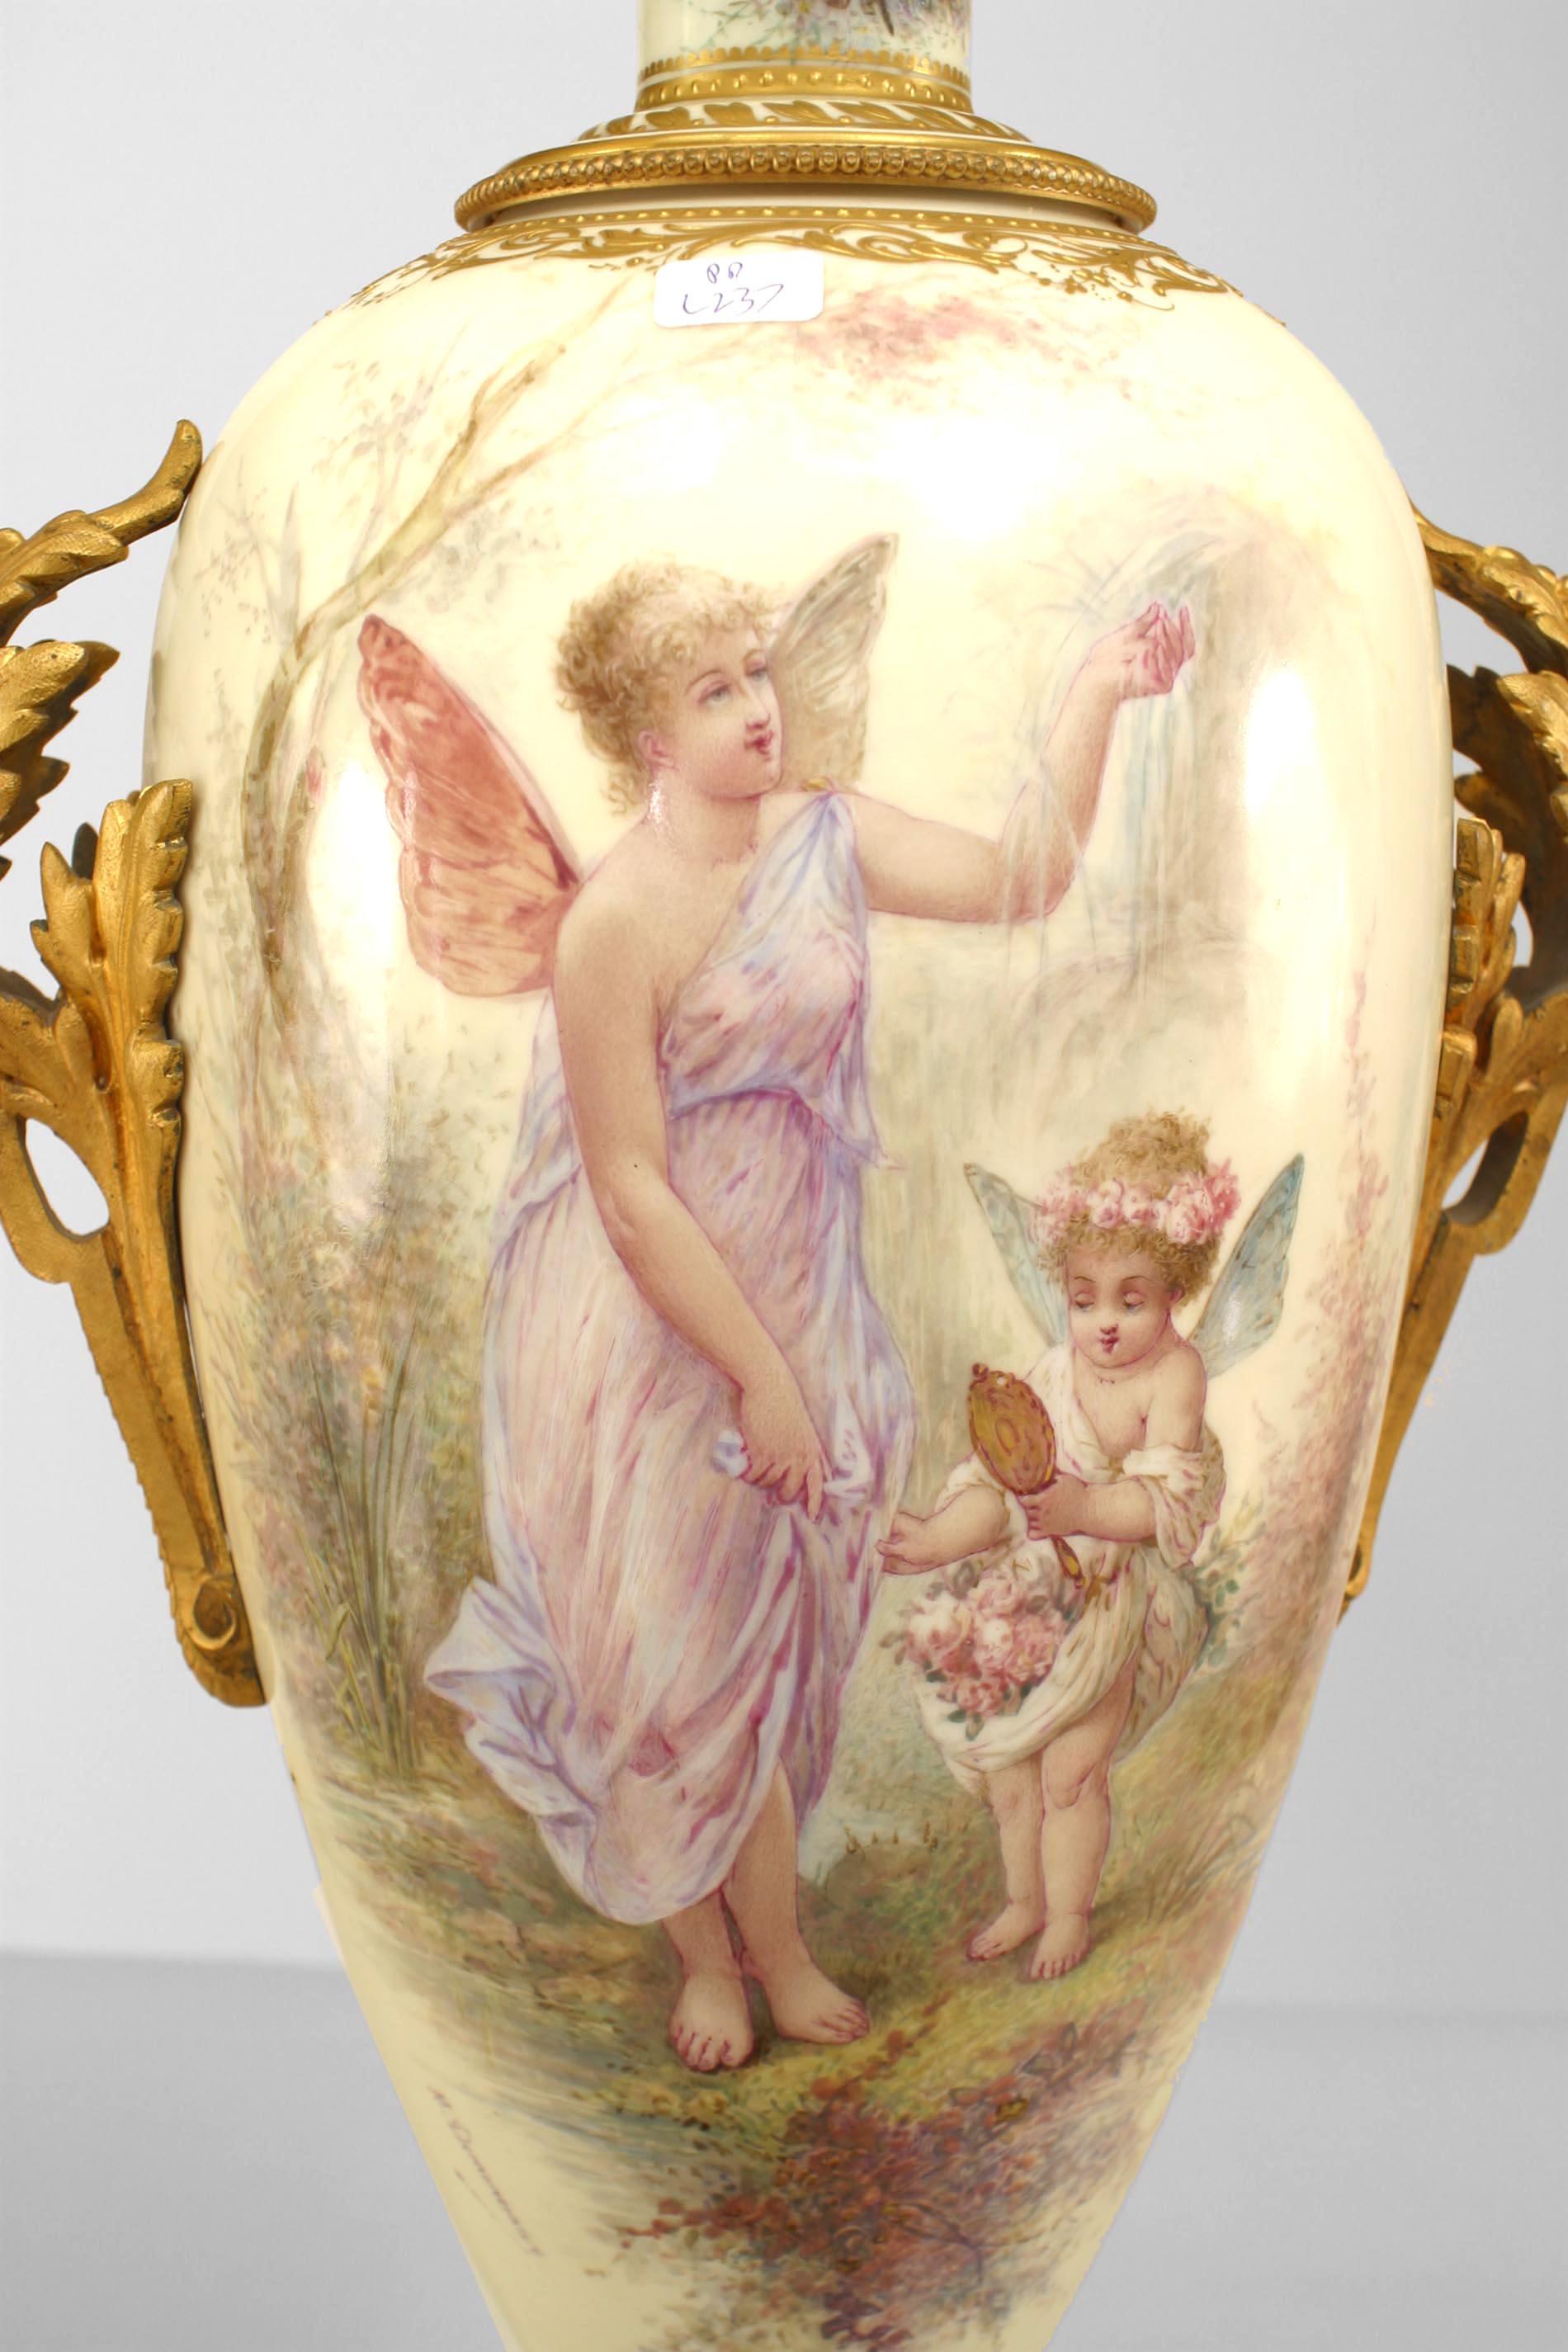 French Victorian (19th Century) S√®vres porcelain lamp with figural angel group mounted on a square bronze base with handles. (signed M. Demoreceaux).
